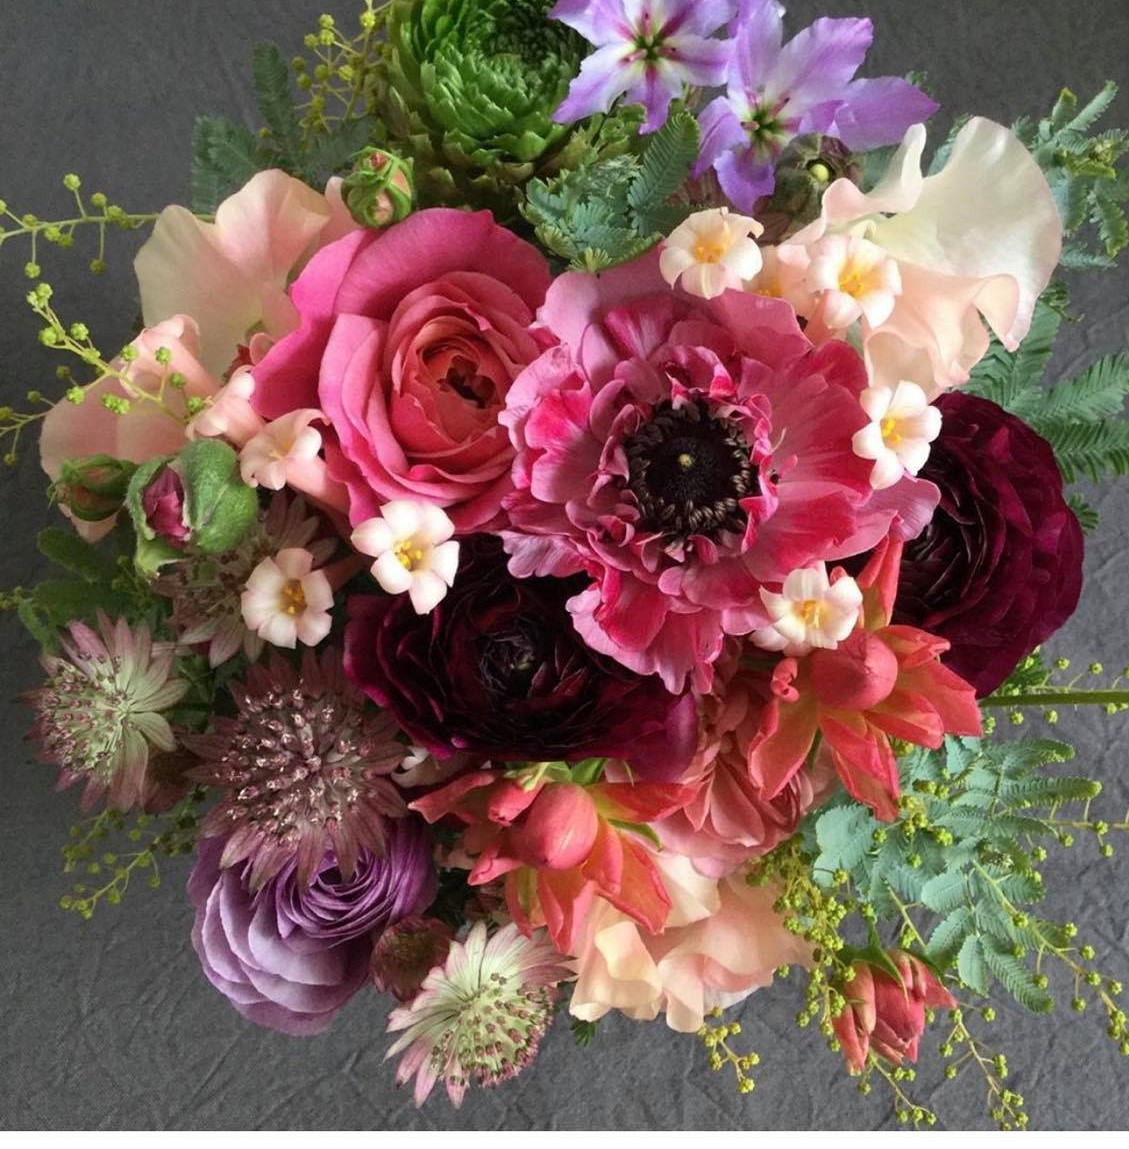 A bouquet of flowers is shown in this picture.